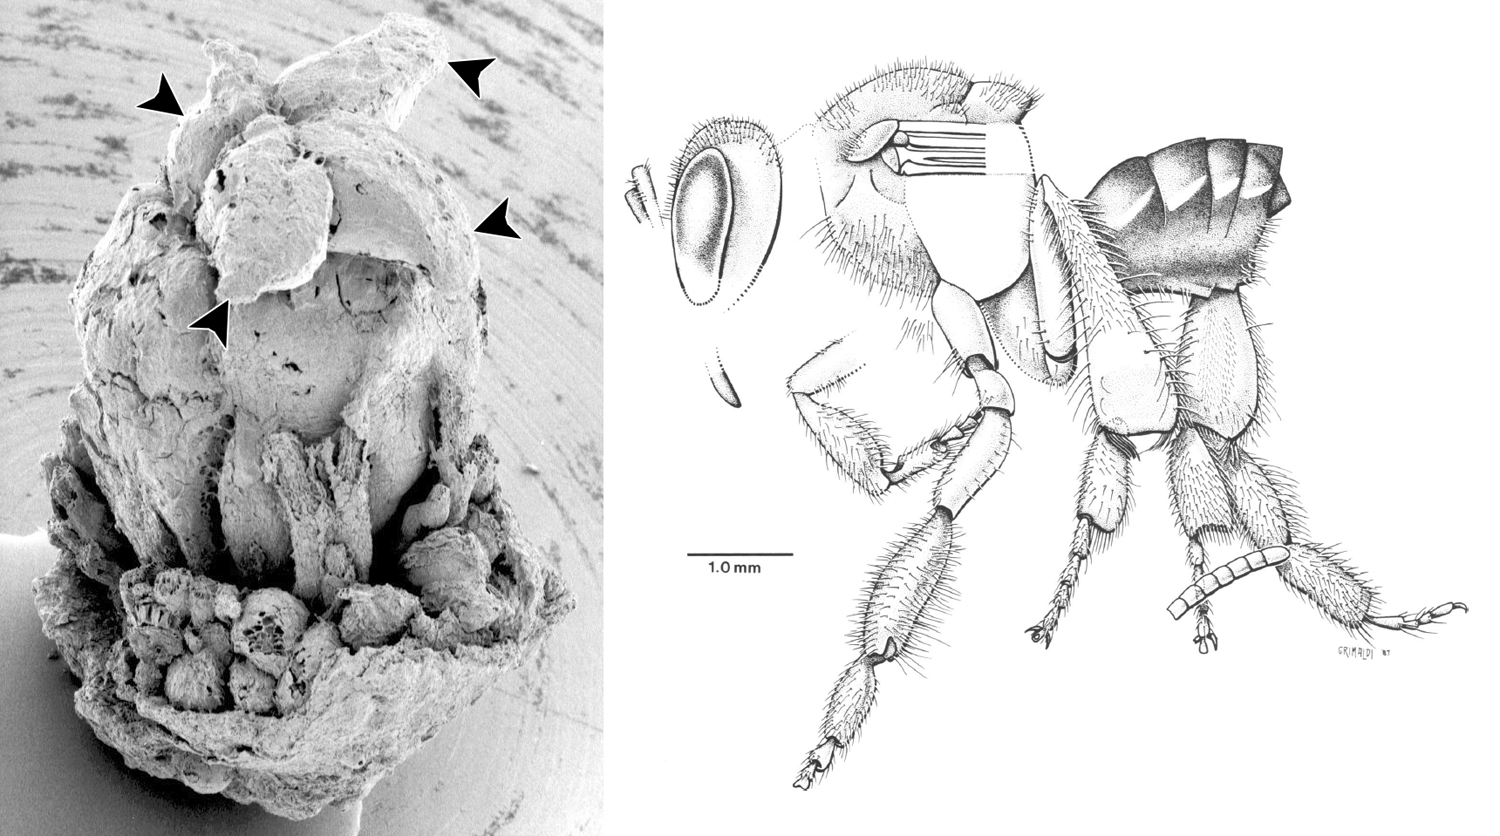 2-Panel figure. Panel 1: Fossil flower of Paleoclusia. Panel 2: Drawing of a fossil stingless bee.